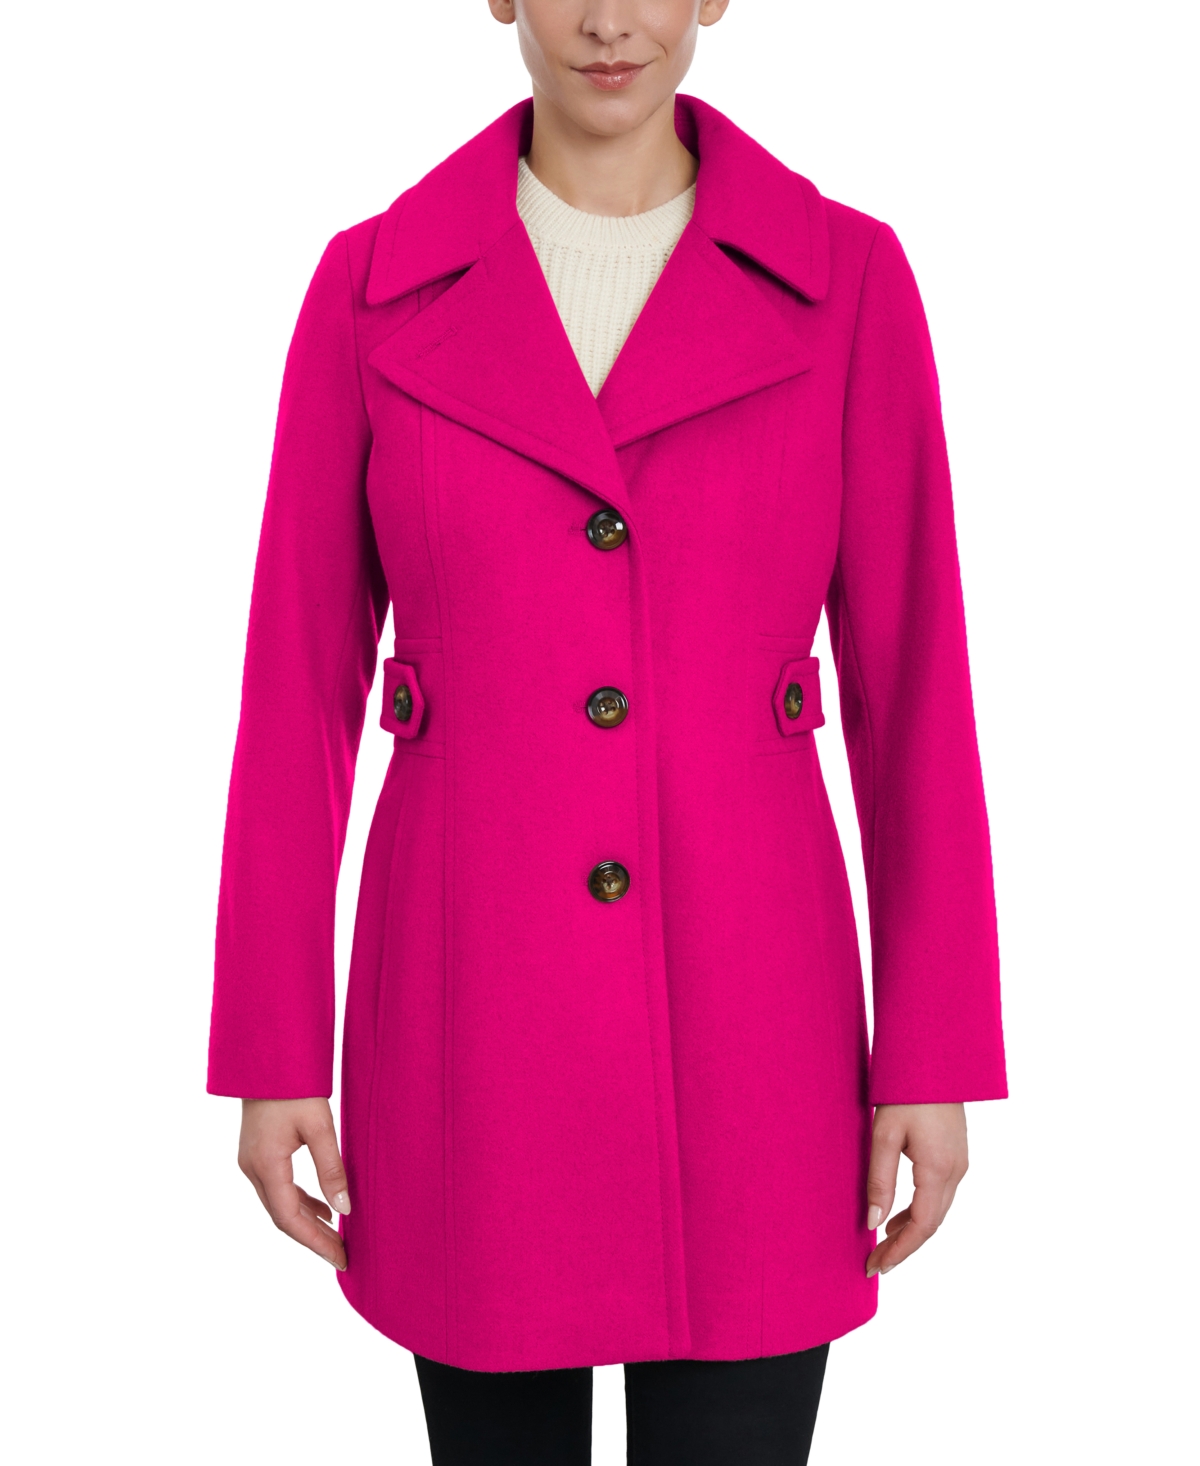 ANNE KLEIN WOMEN'S PETITE SINGLE-BREASTED NOTCHED-COLLAR PEACOAT, CREATED FOR MACY'S